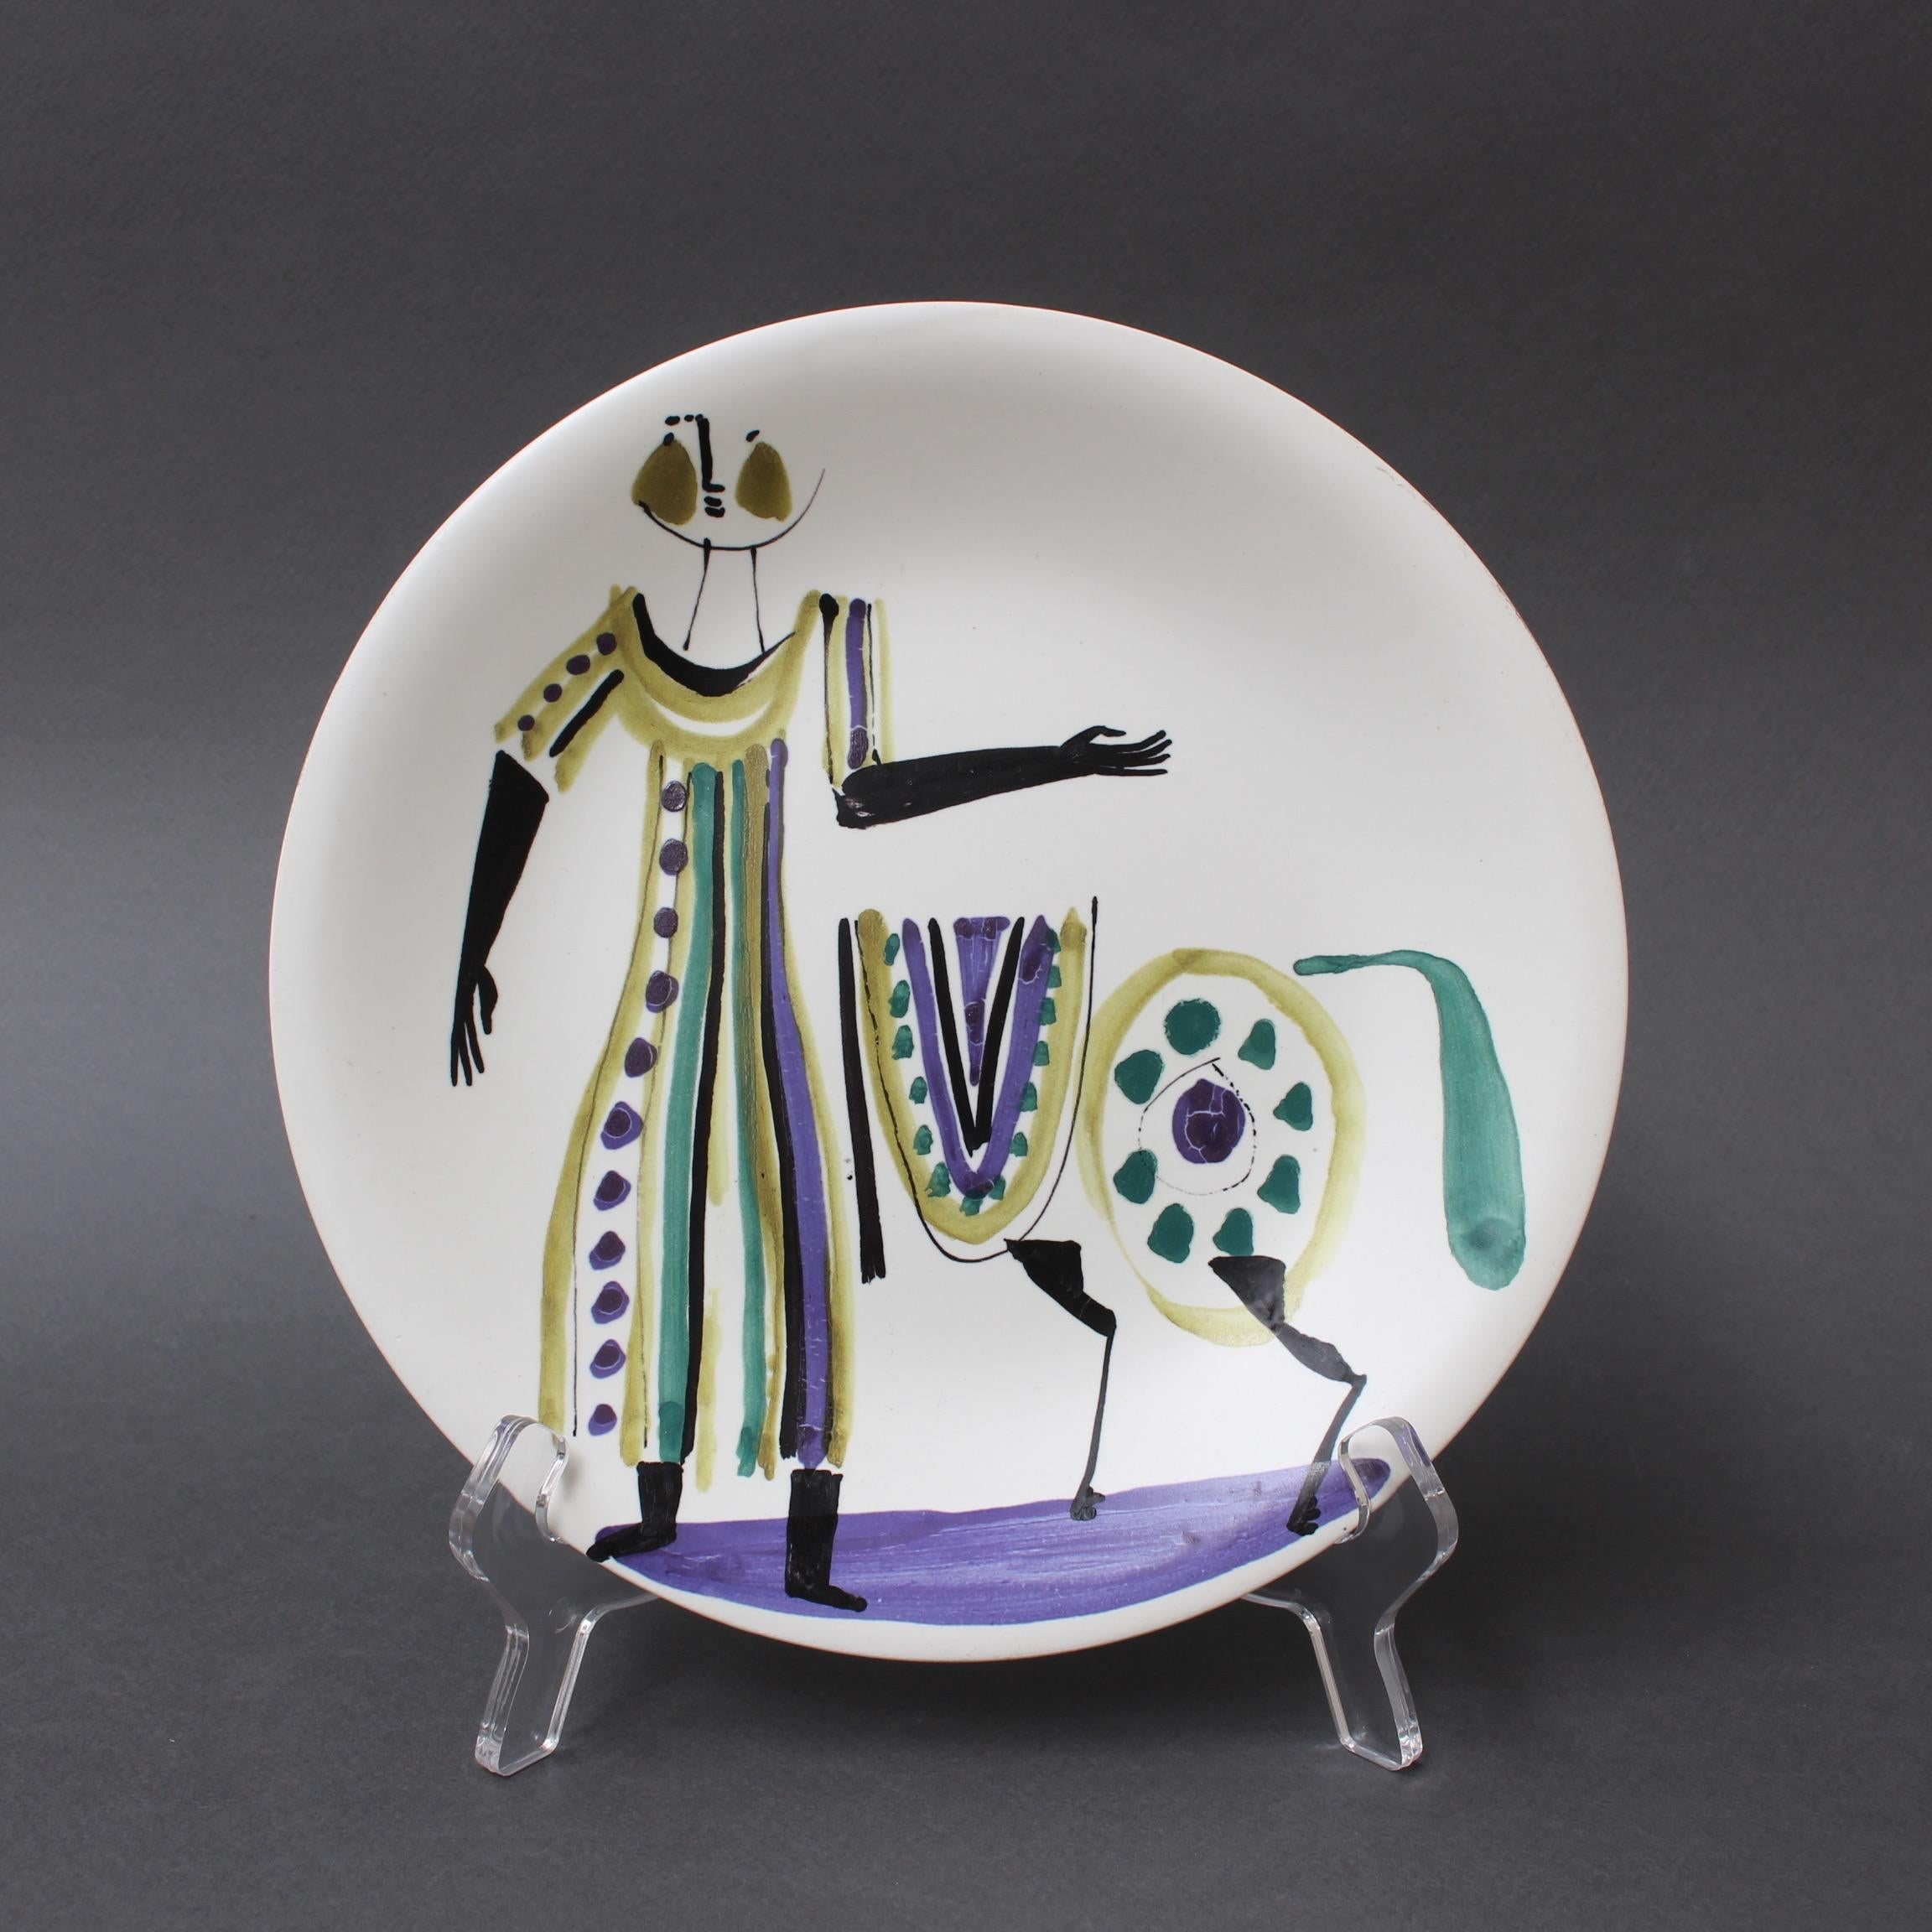 Set of four decorative plates by Roger Capron (circa 1950s). Acquired from a family of Capron collectors who have held them for over 60 years, these plates with stylised characters are in excellent vintage condition with only very minor blemishing